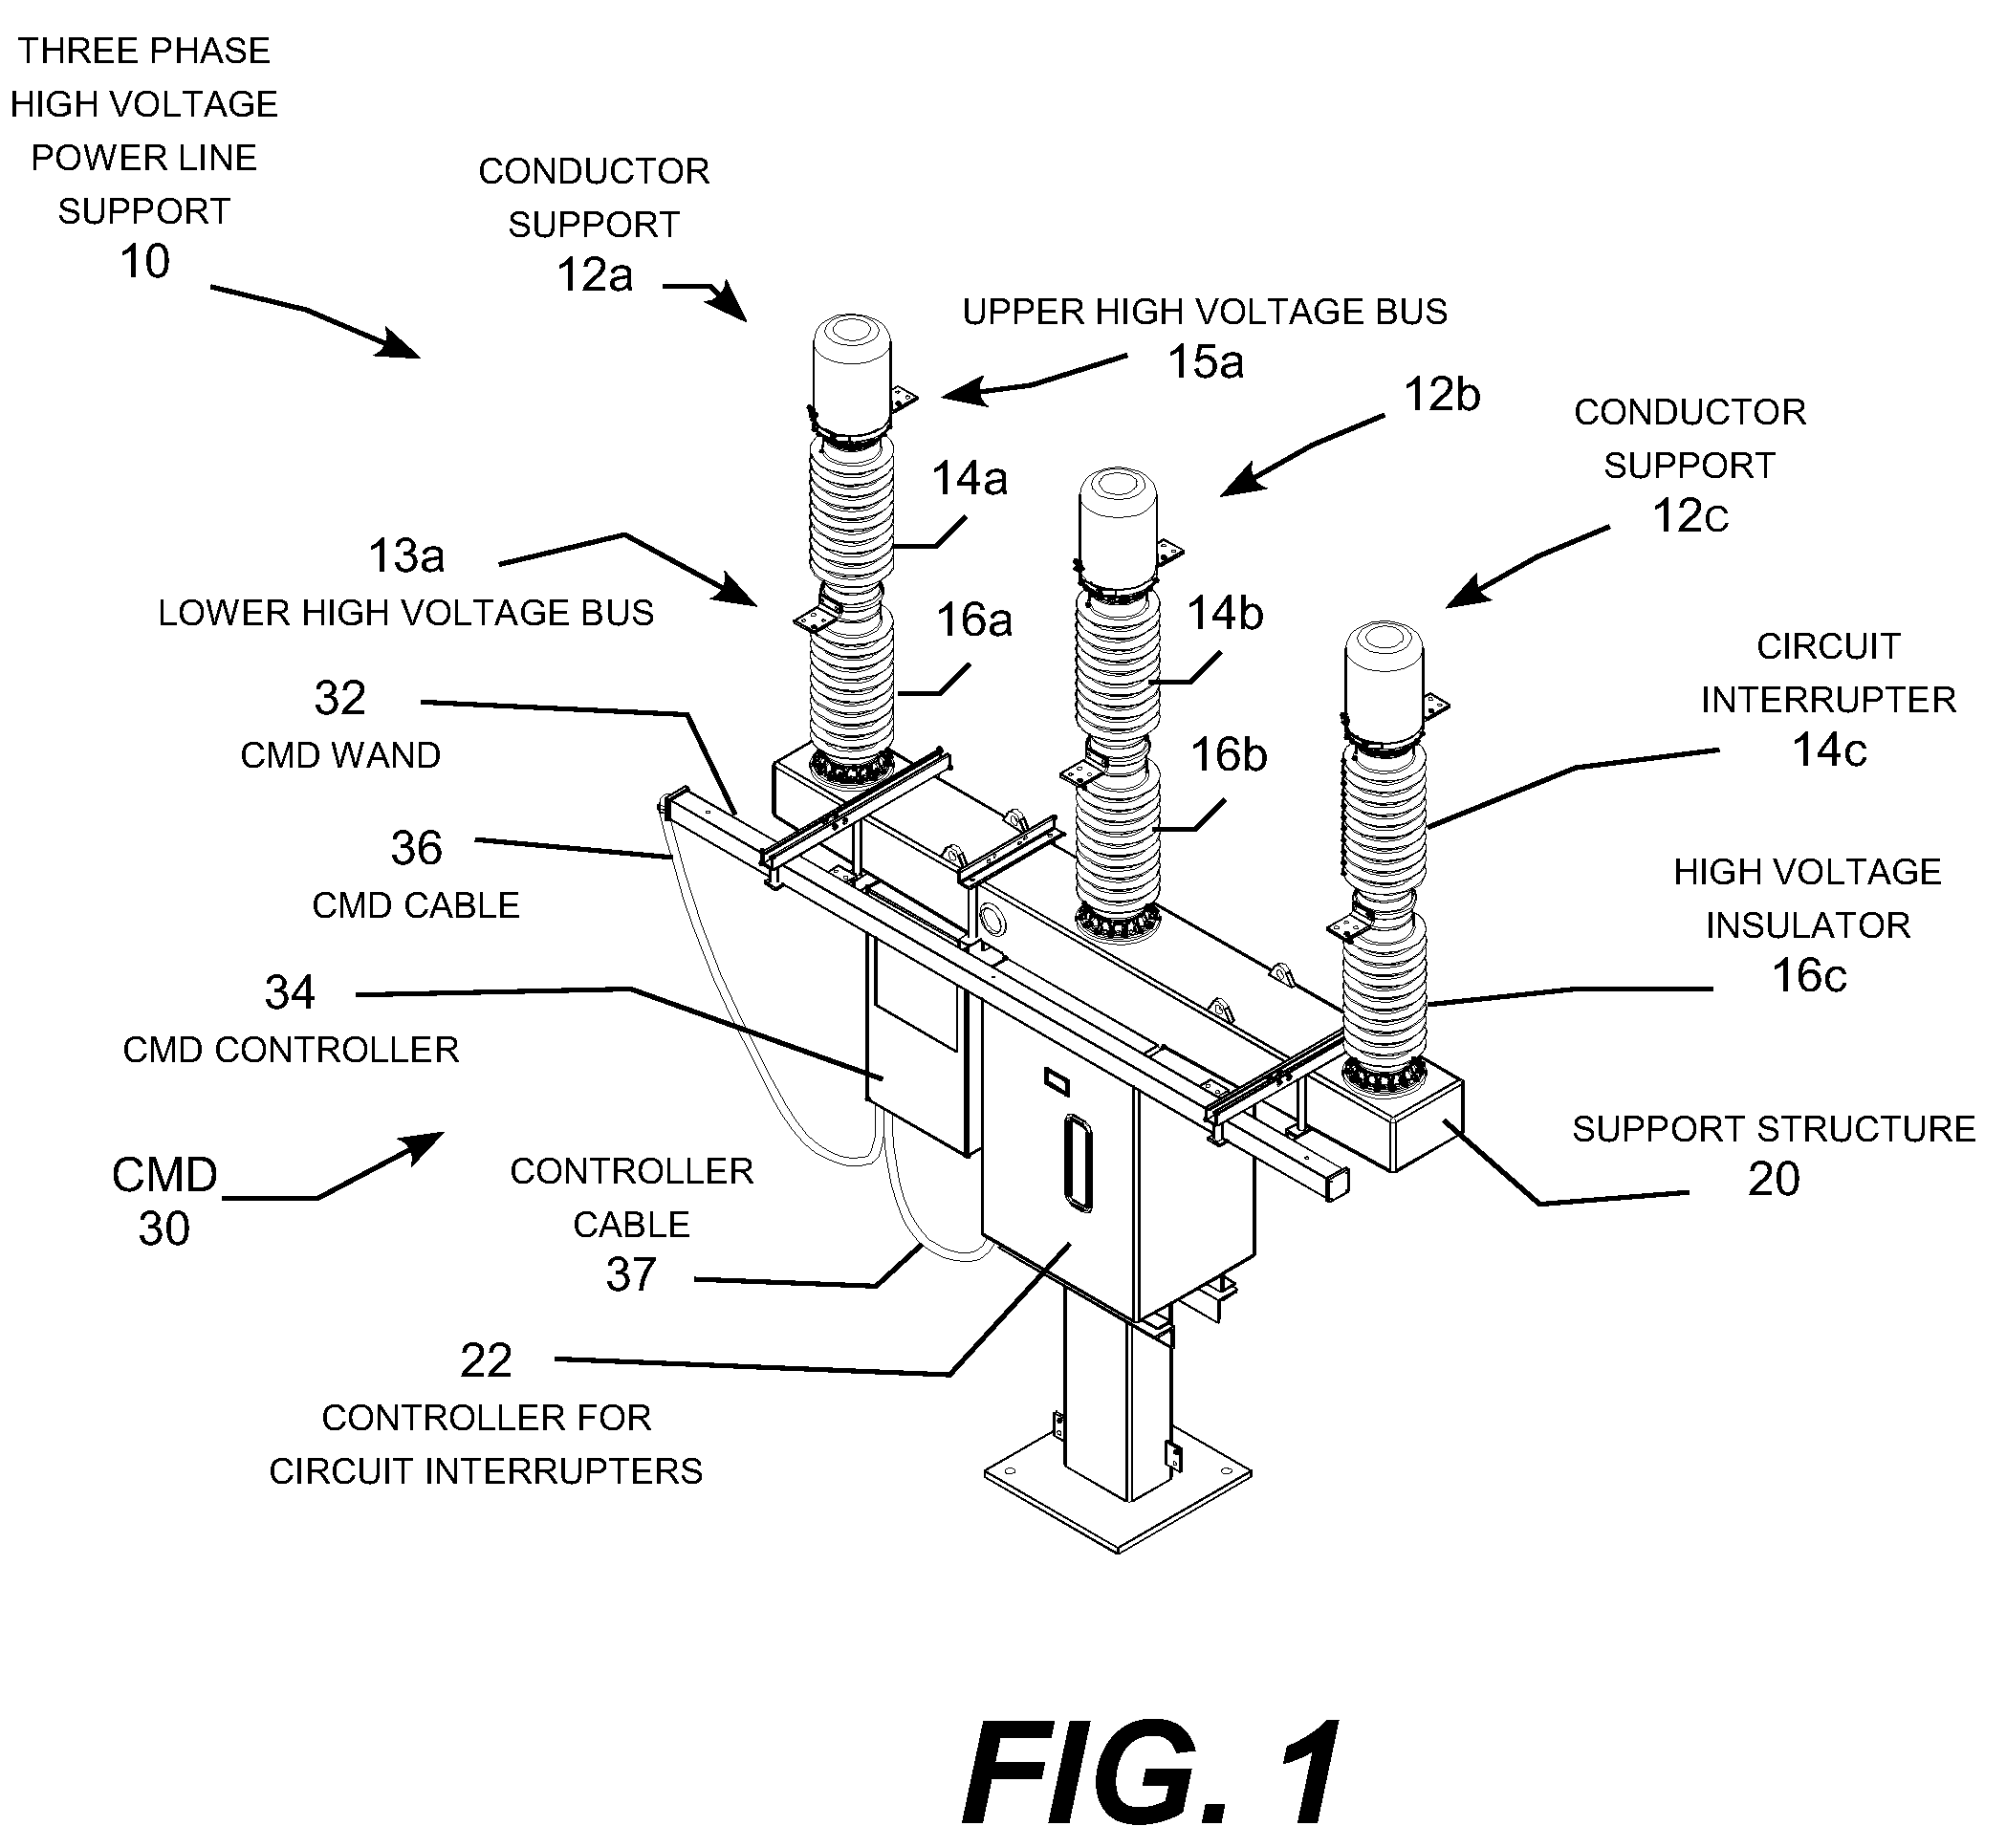 Current monitoring device for high voltage electric power lines